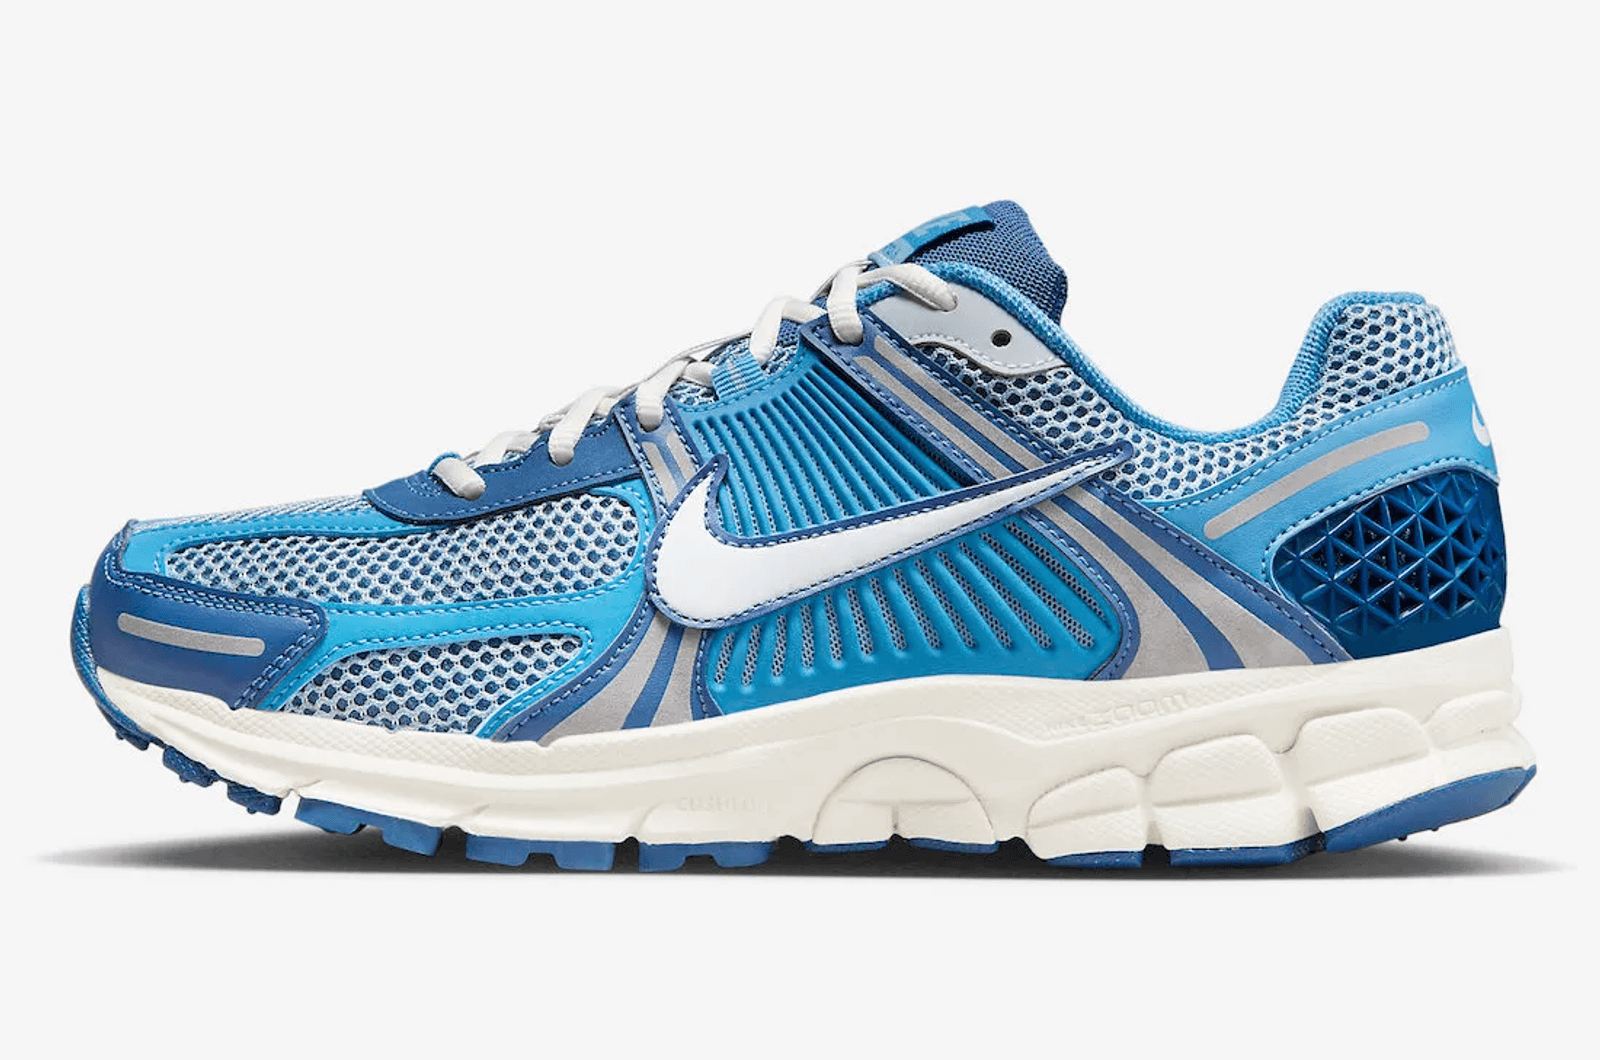 First Look at the New Nike Zoom Vomero 5 Worn Blue - TheSiteSupply